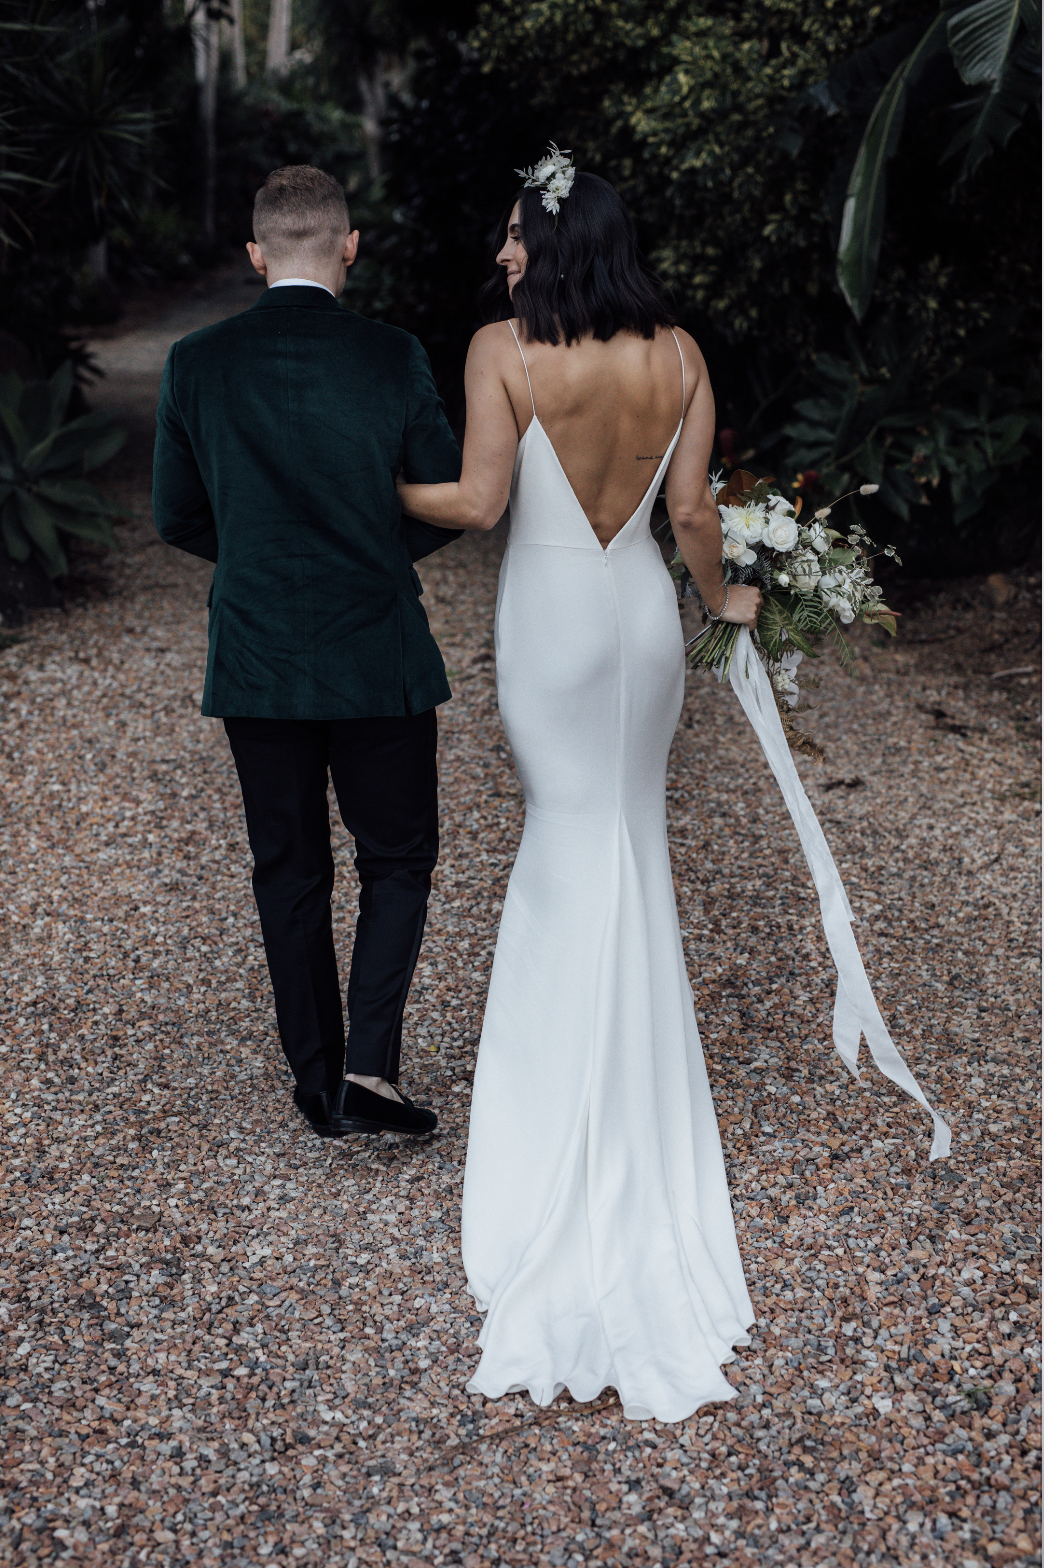 Looking for a simple white wedding dress? Read these tips for